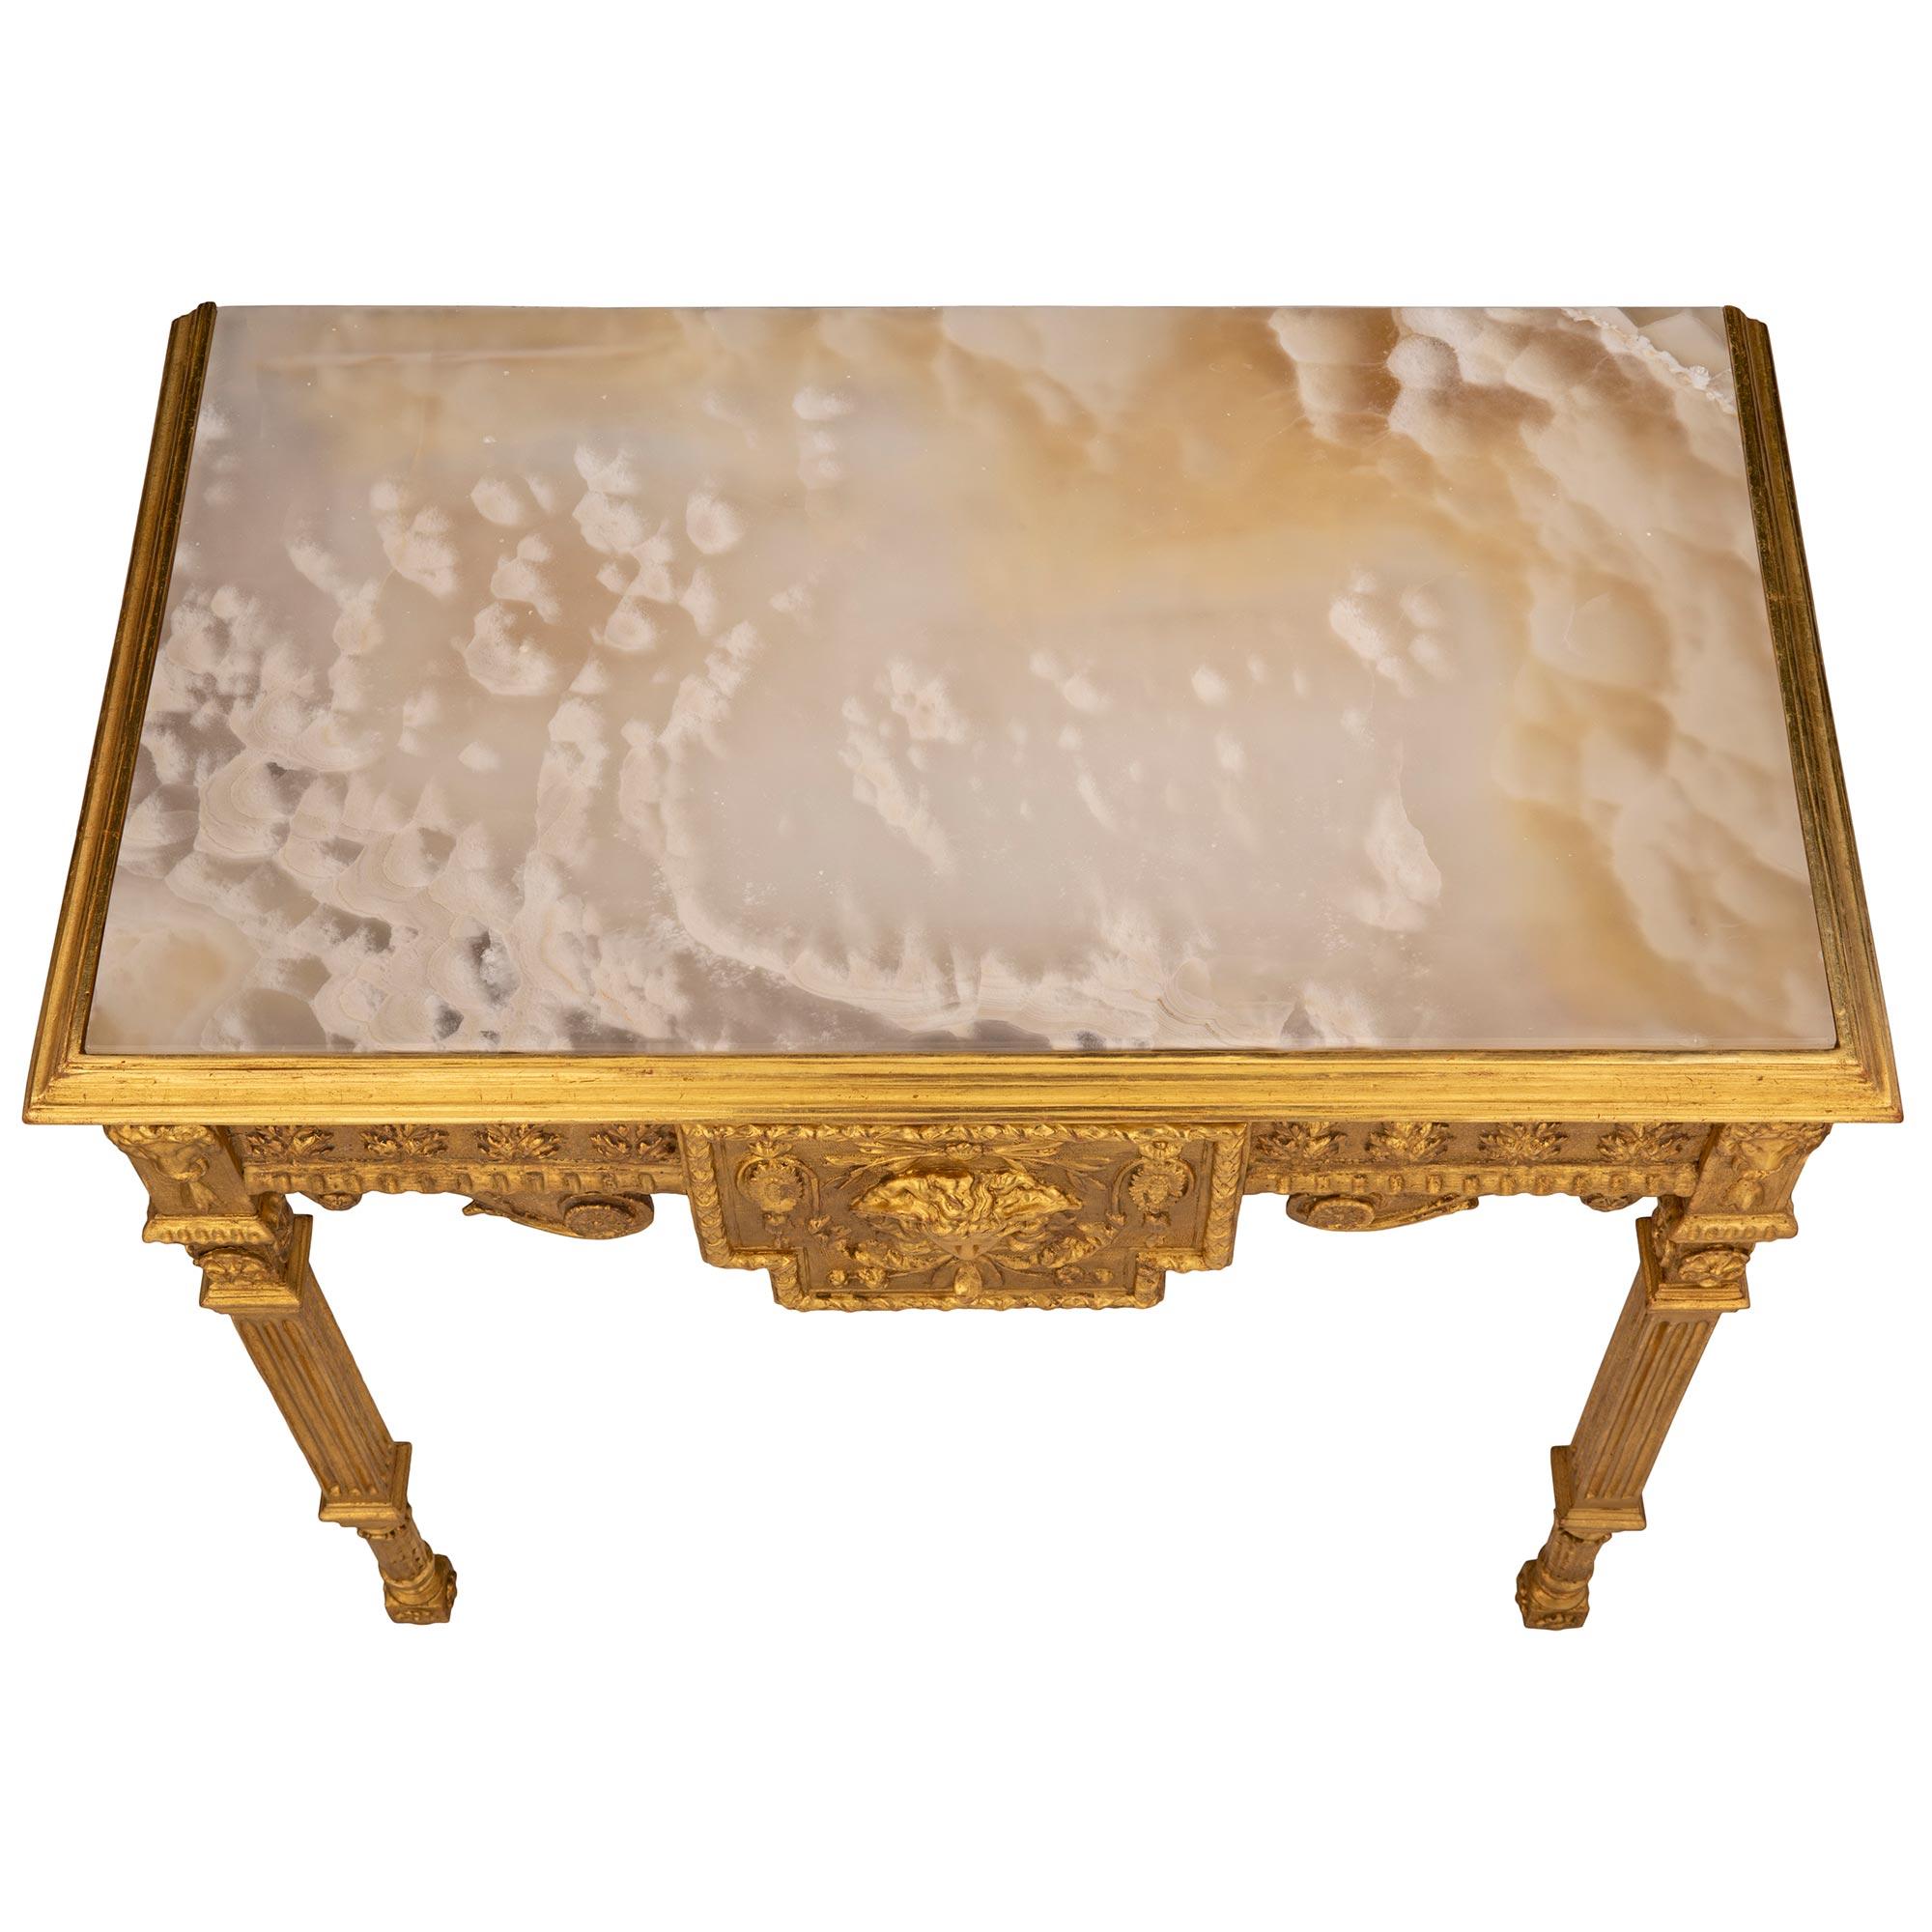 A beautiful and high quality Italian 18th century Louis XVI st. giltwood and Alabastro Cotognino console. The freestanding console is raised by unique and extremely decorative block rosette feet below baluster shaped acanthus leaf carvings and